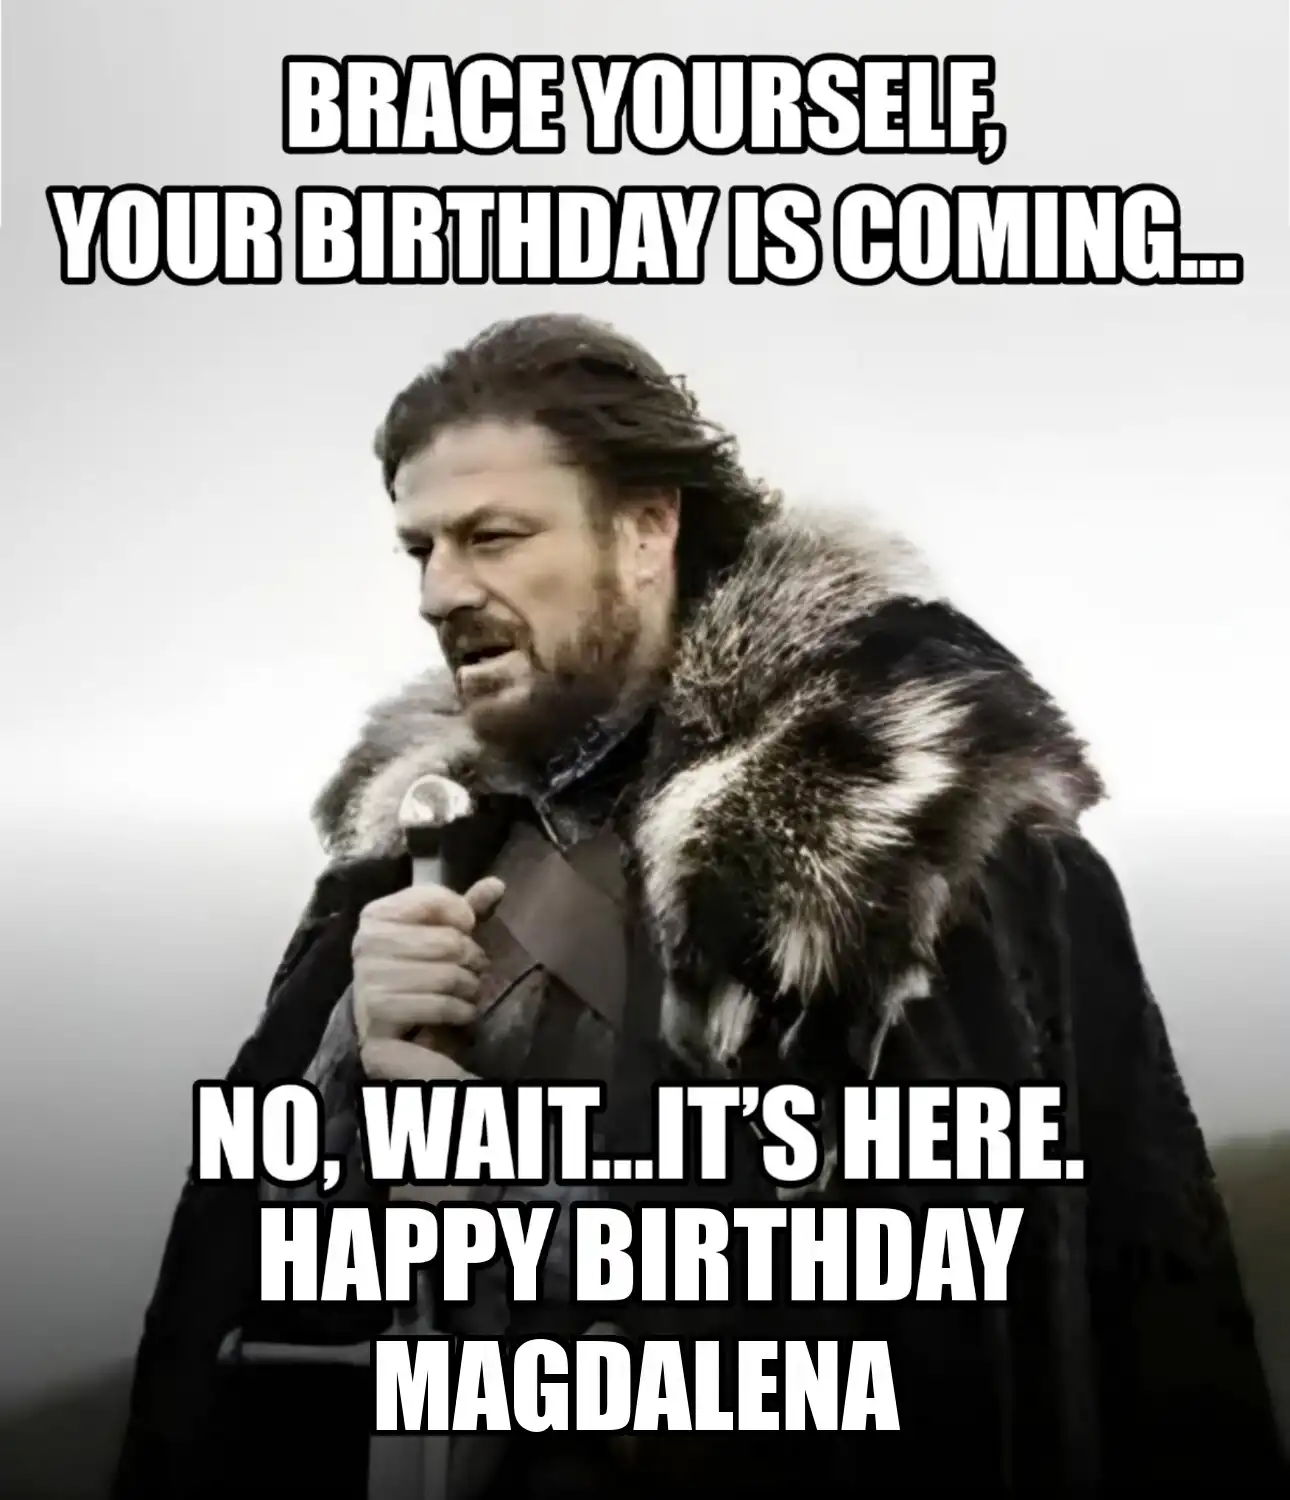 Happy Birthday Magdalena Brace Yourself Your Birthday Is Coming Meme